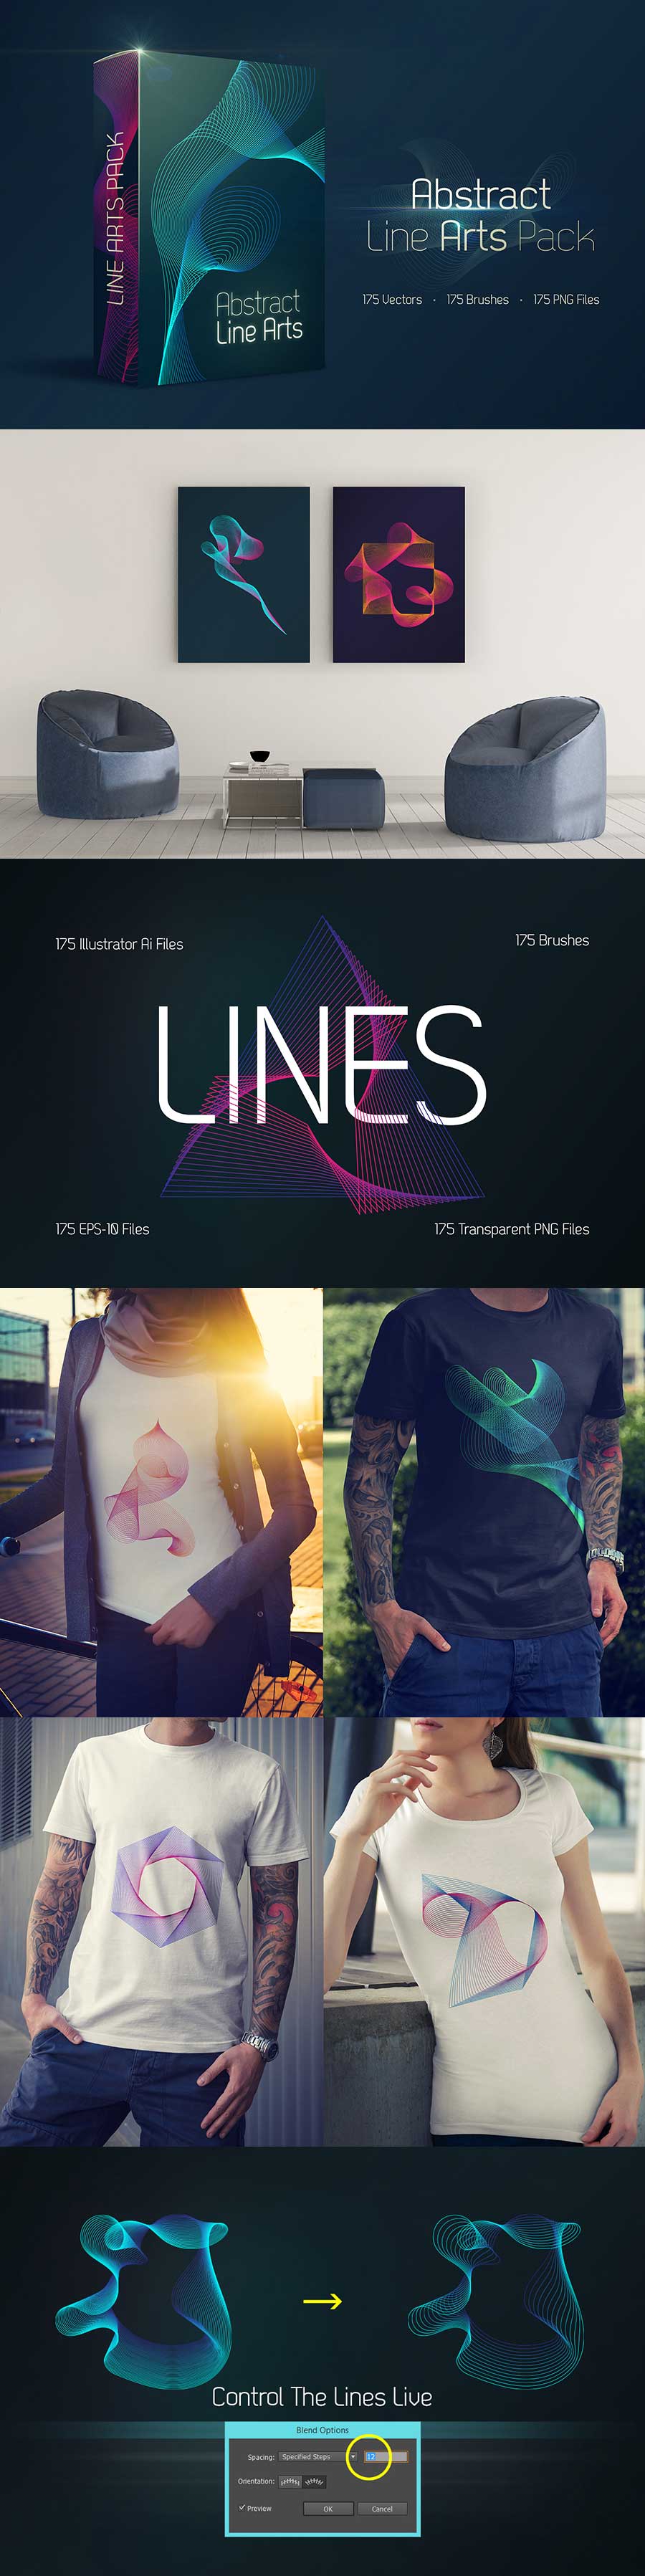 Free-175-Abstract-Line-Arts-for-Designers